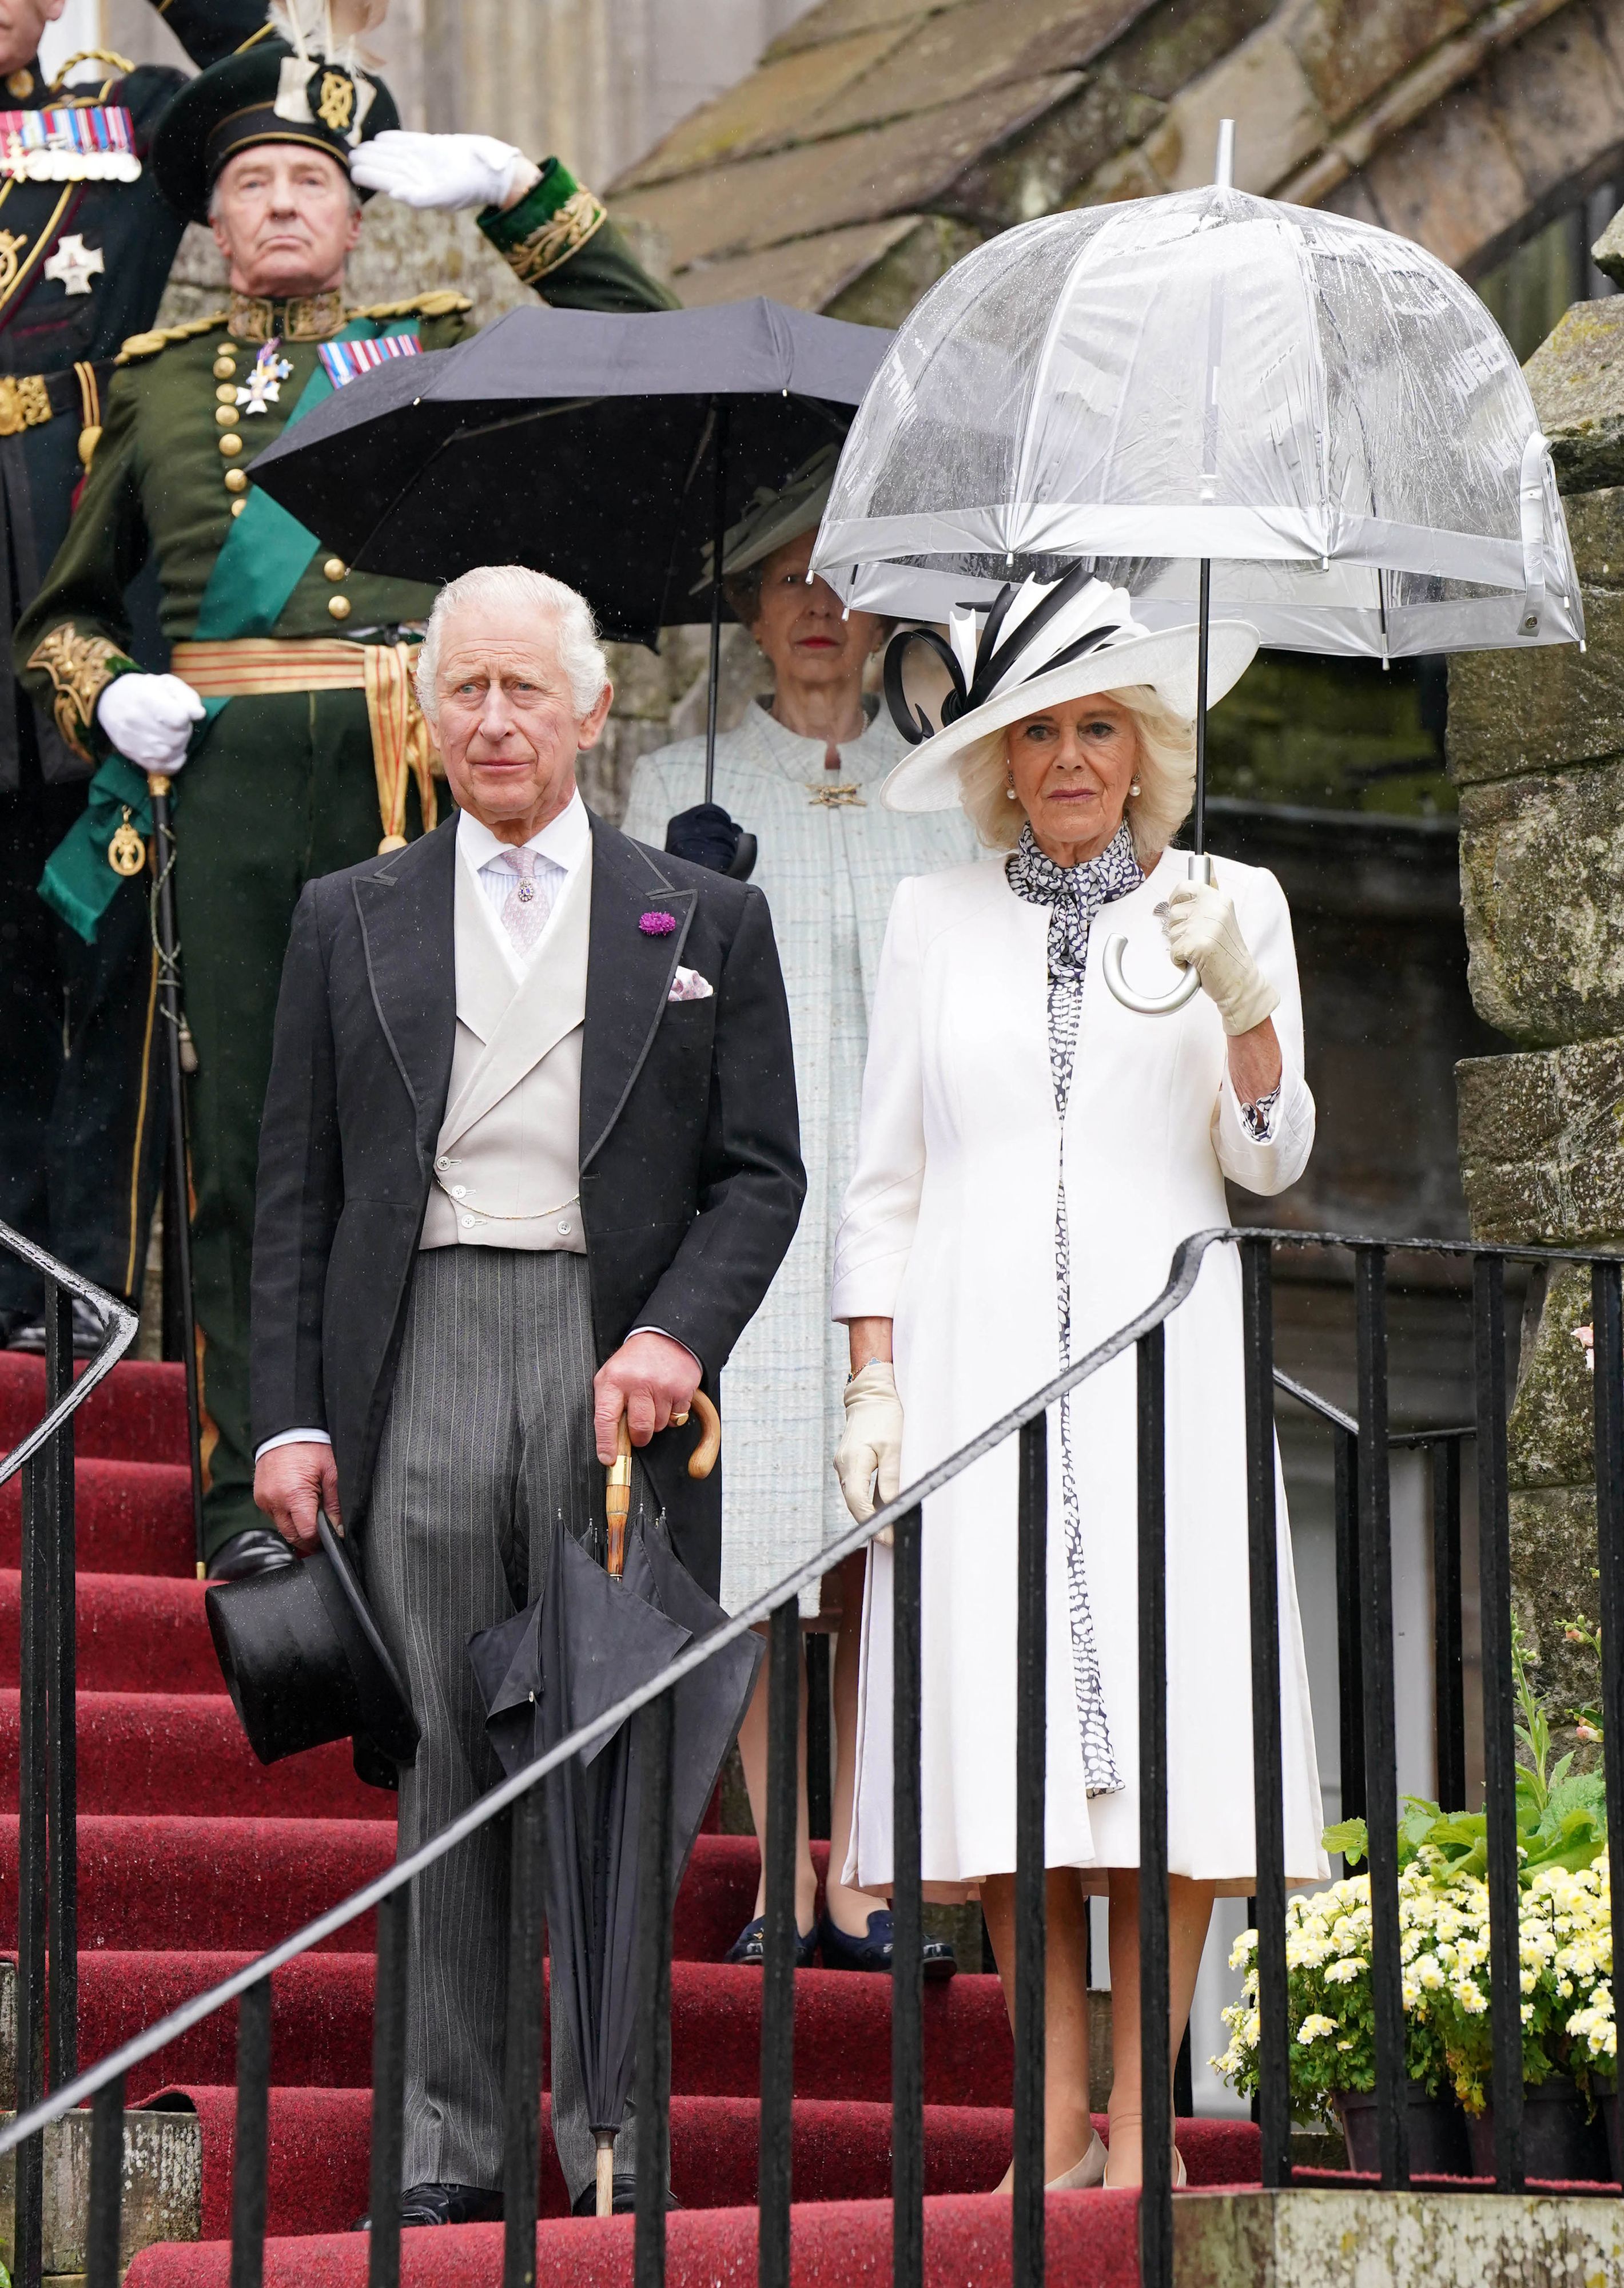 <p>King Charles III and Queen Camilla paused for the national anthem as they hosted guests at a rainy garden party at the Palace of Holyroodhouse in Edinburgh, Scotland, on July 4, 2023. The monarch and his consort were in Scotland for the first annual Royal Week of his reign where they undertook a range of engagements celebrating community, innovation and history. </p>